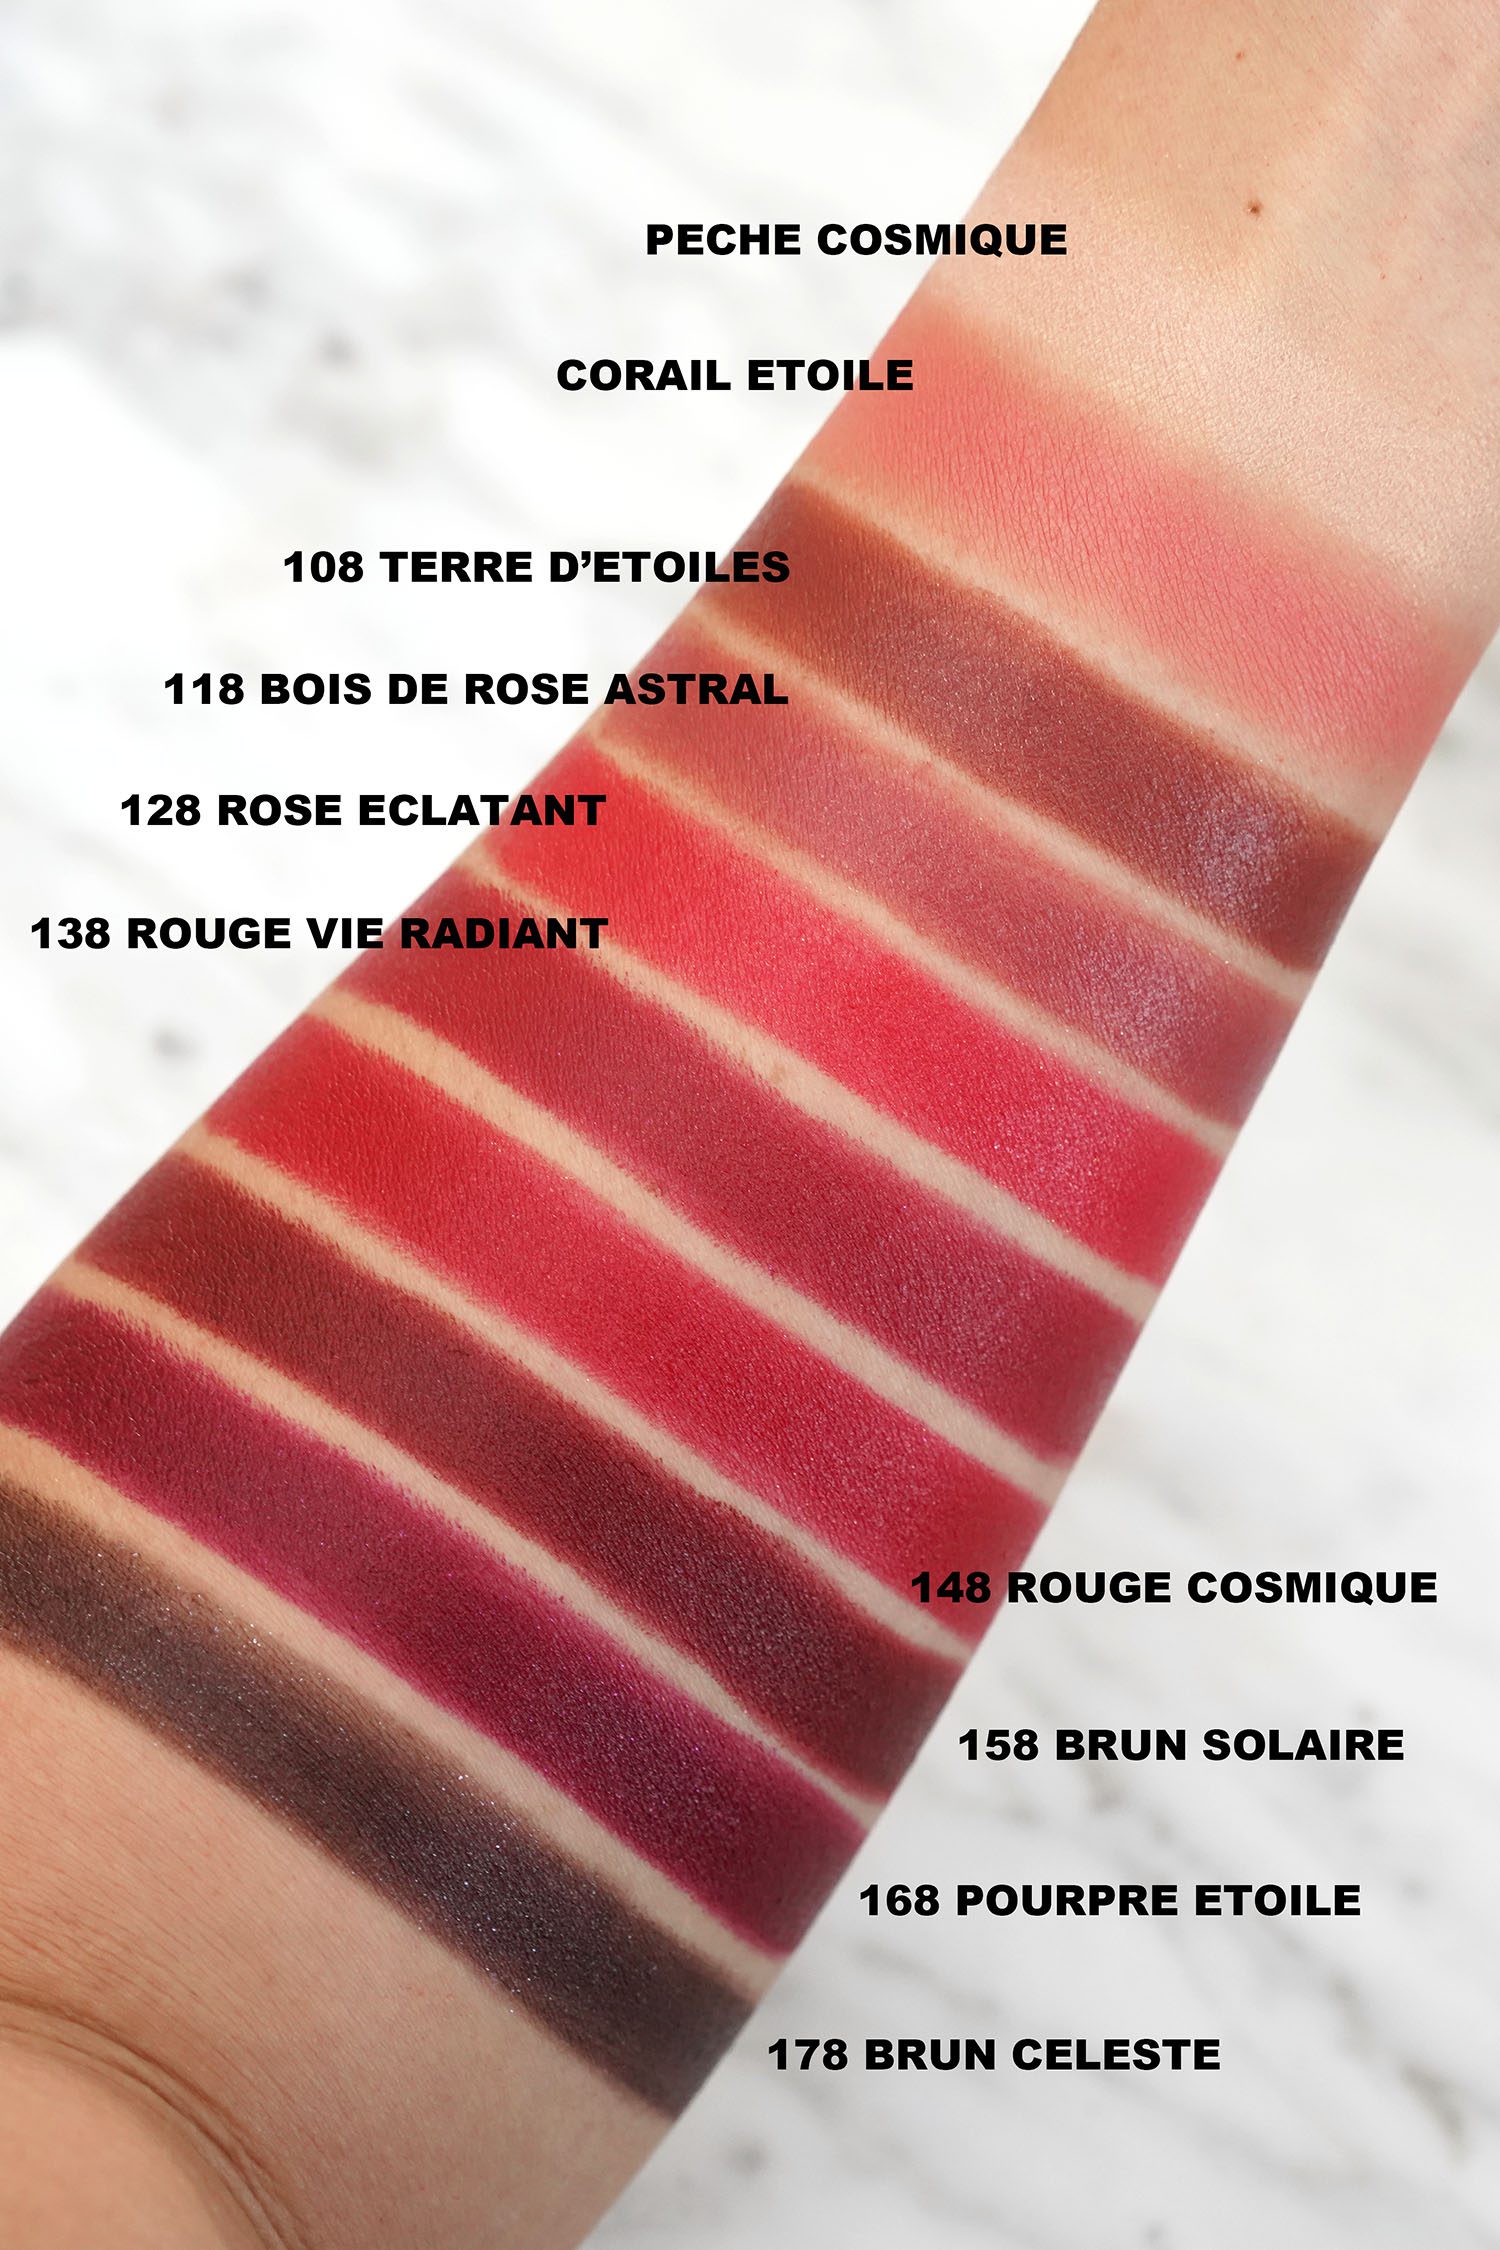 Swatching the new shades of CHANEL Rouge Allure Velvet Luminous